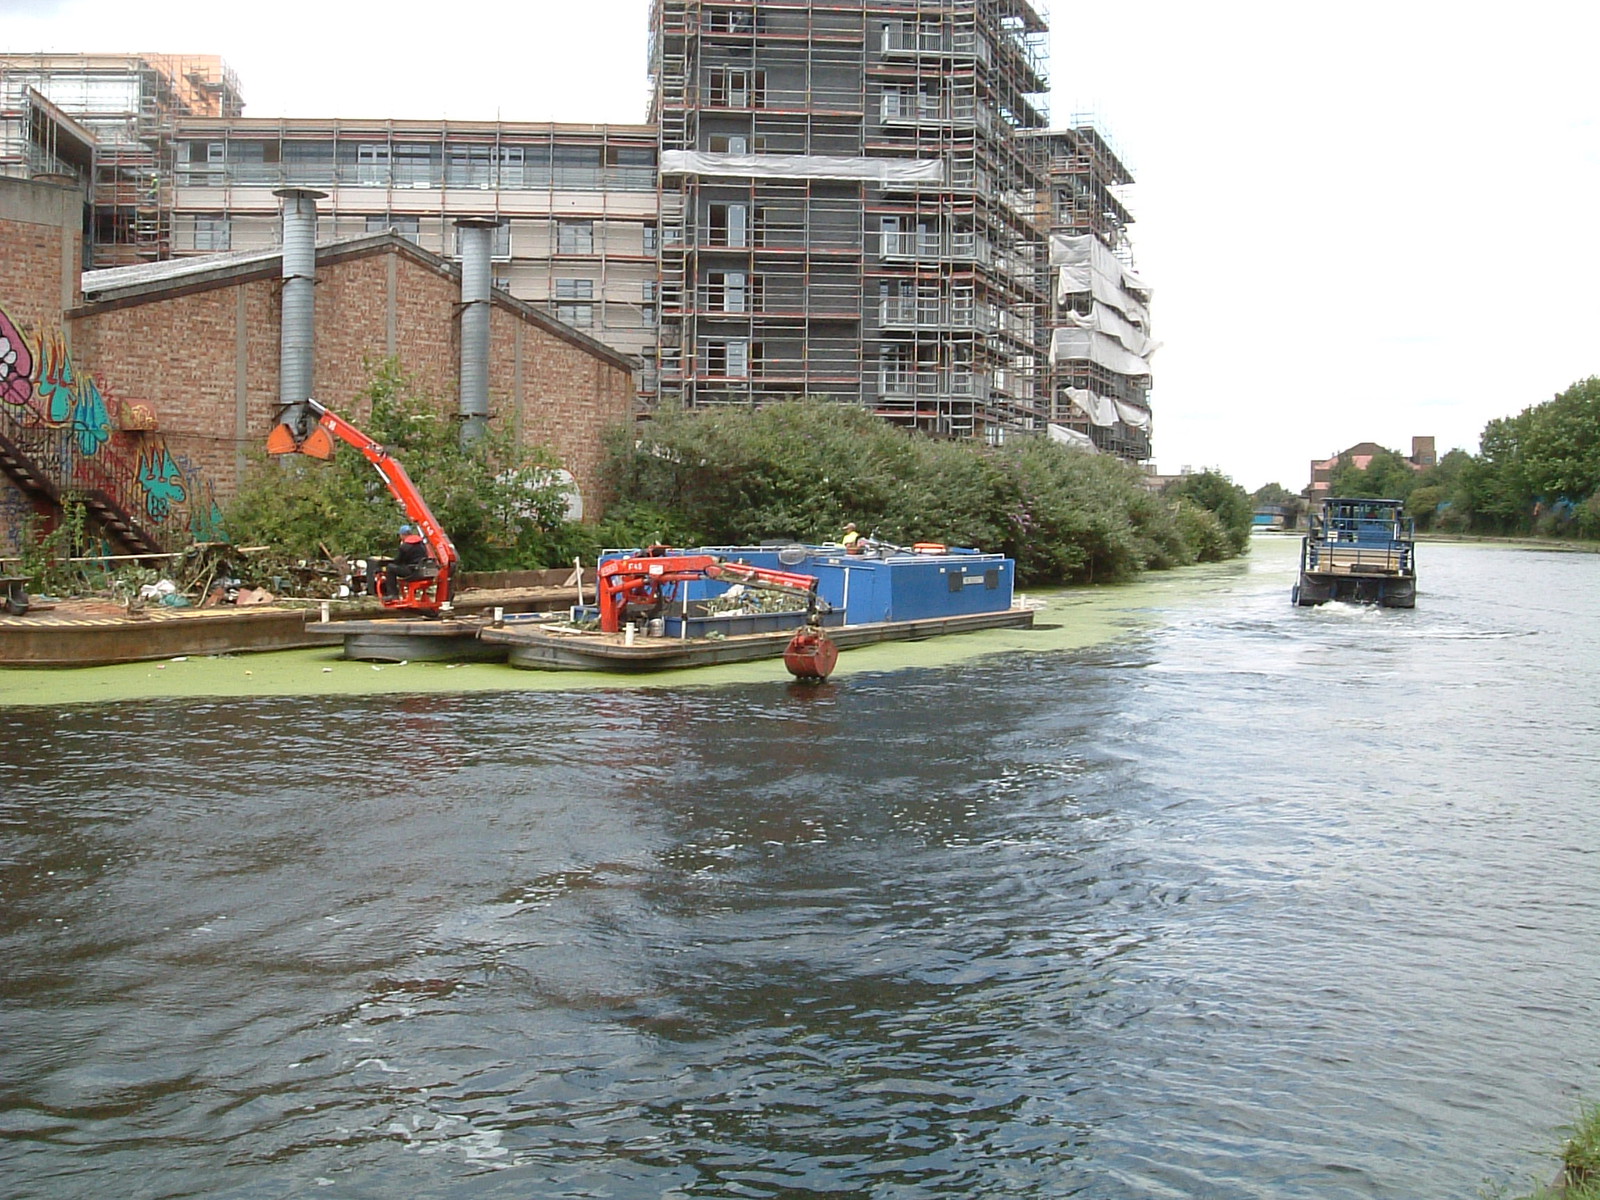 Canal-cleaning boats in Hackney Wick